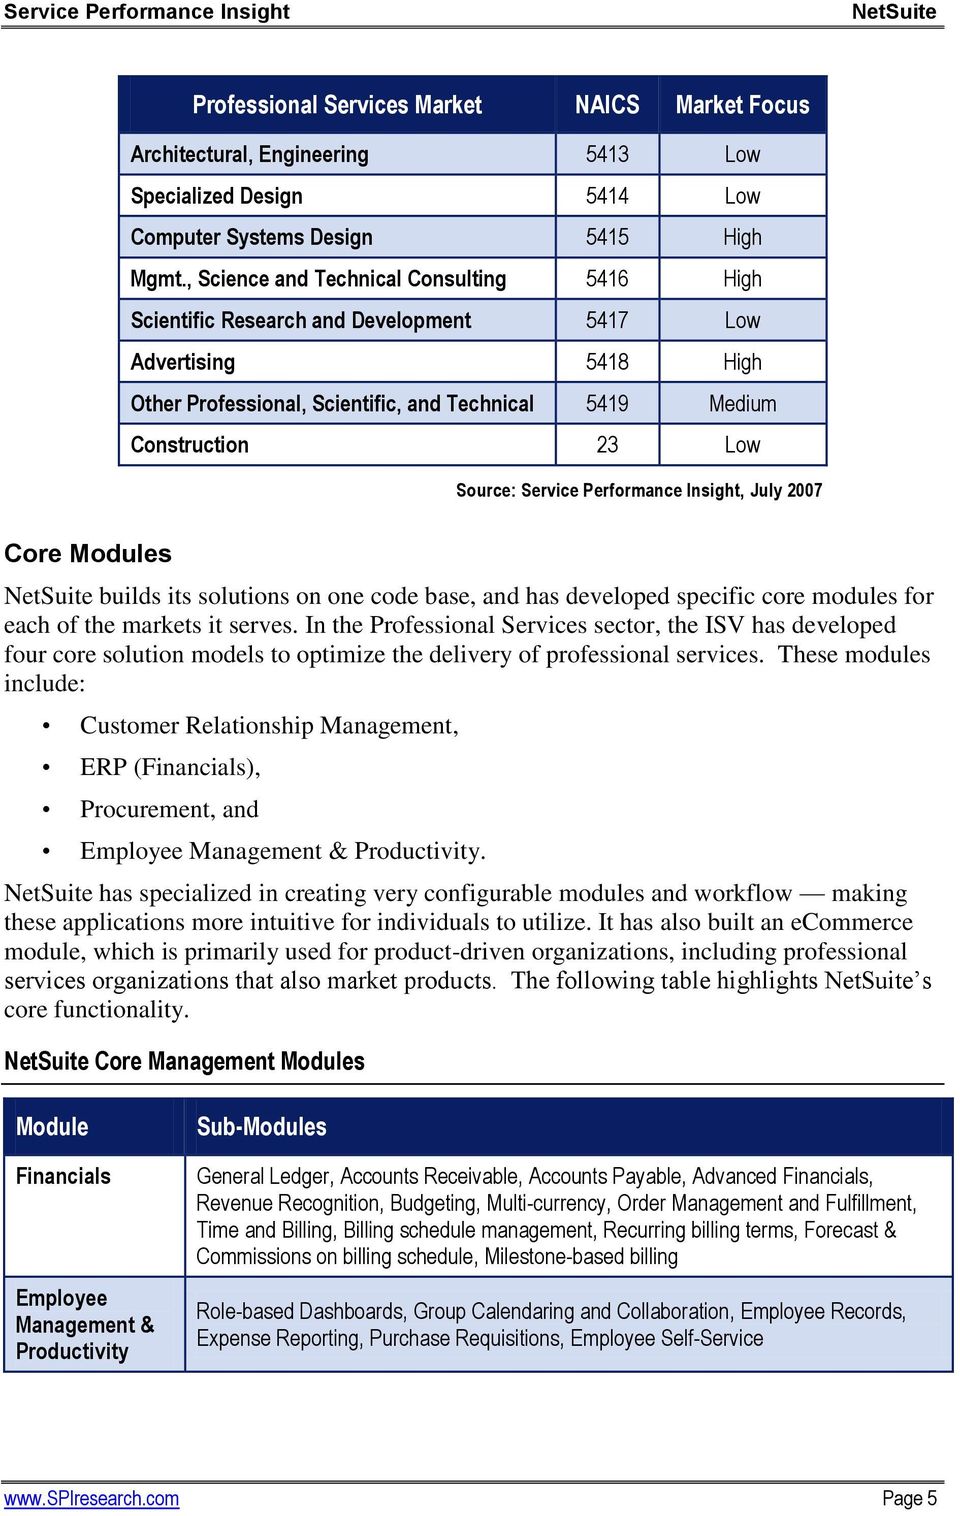 Service Performance Insight, July 2007 Core Modules builds its solutions on one code base, and has developed specific core modules for each of the markets it serves.